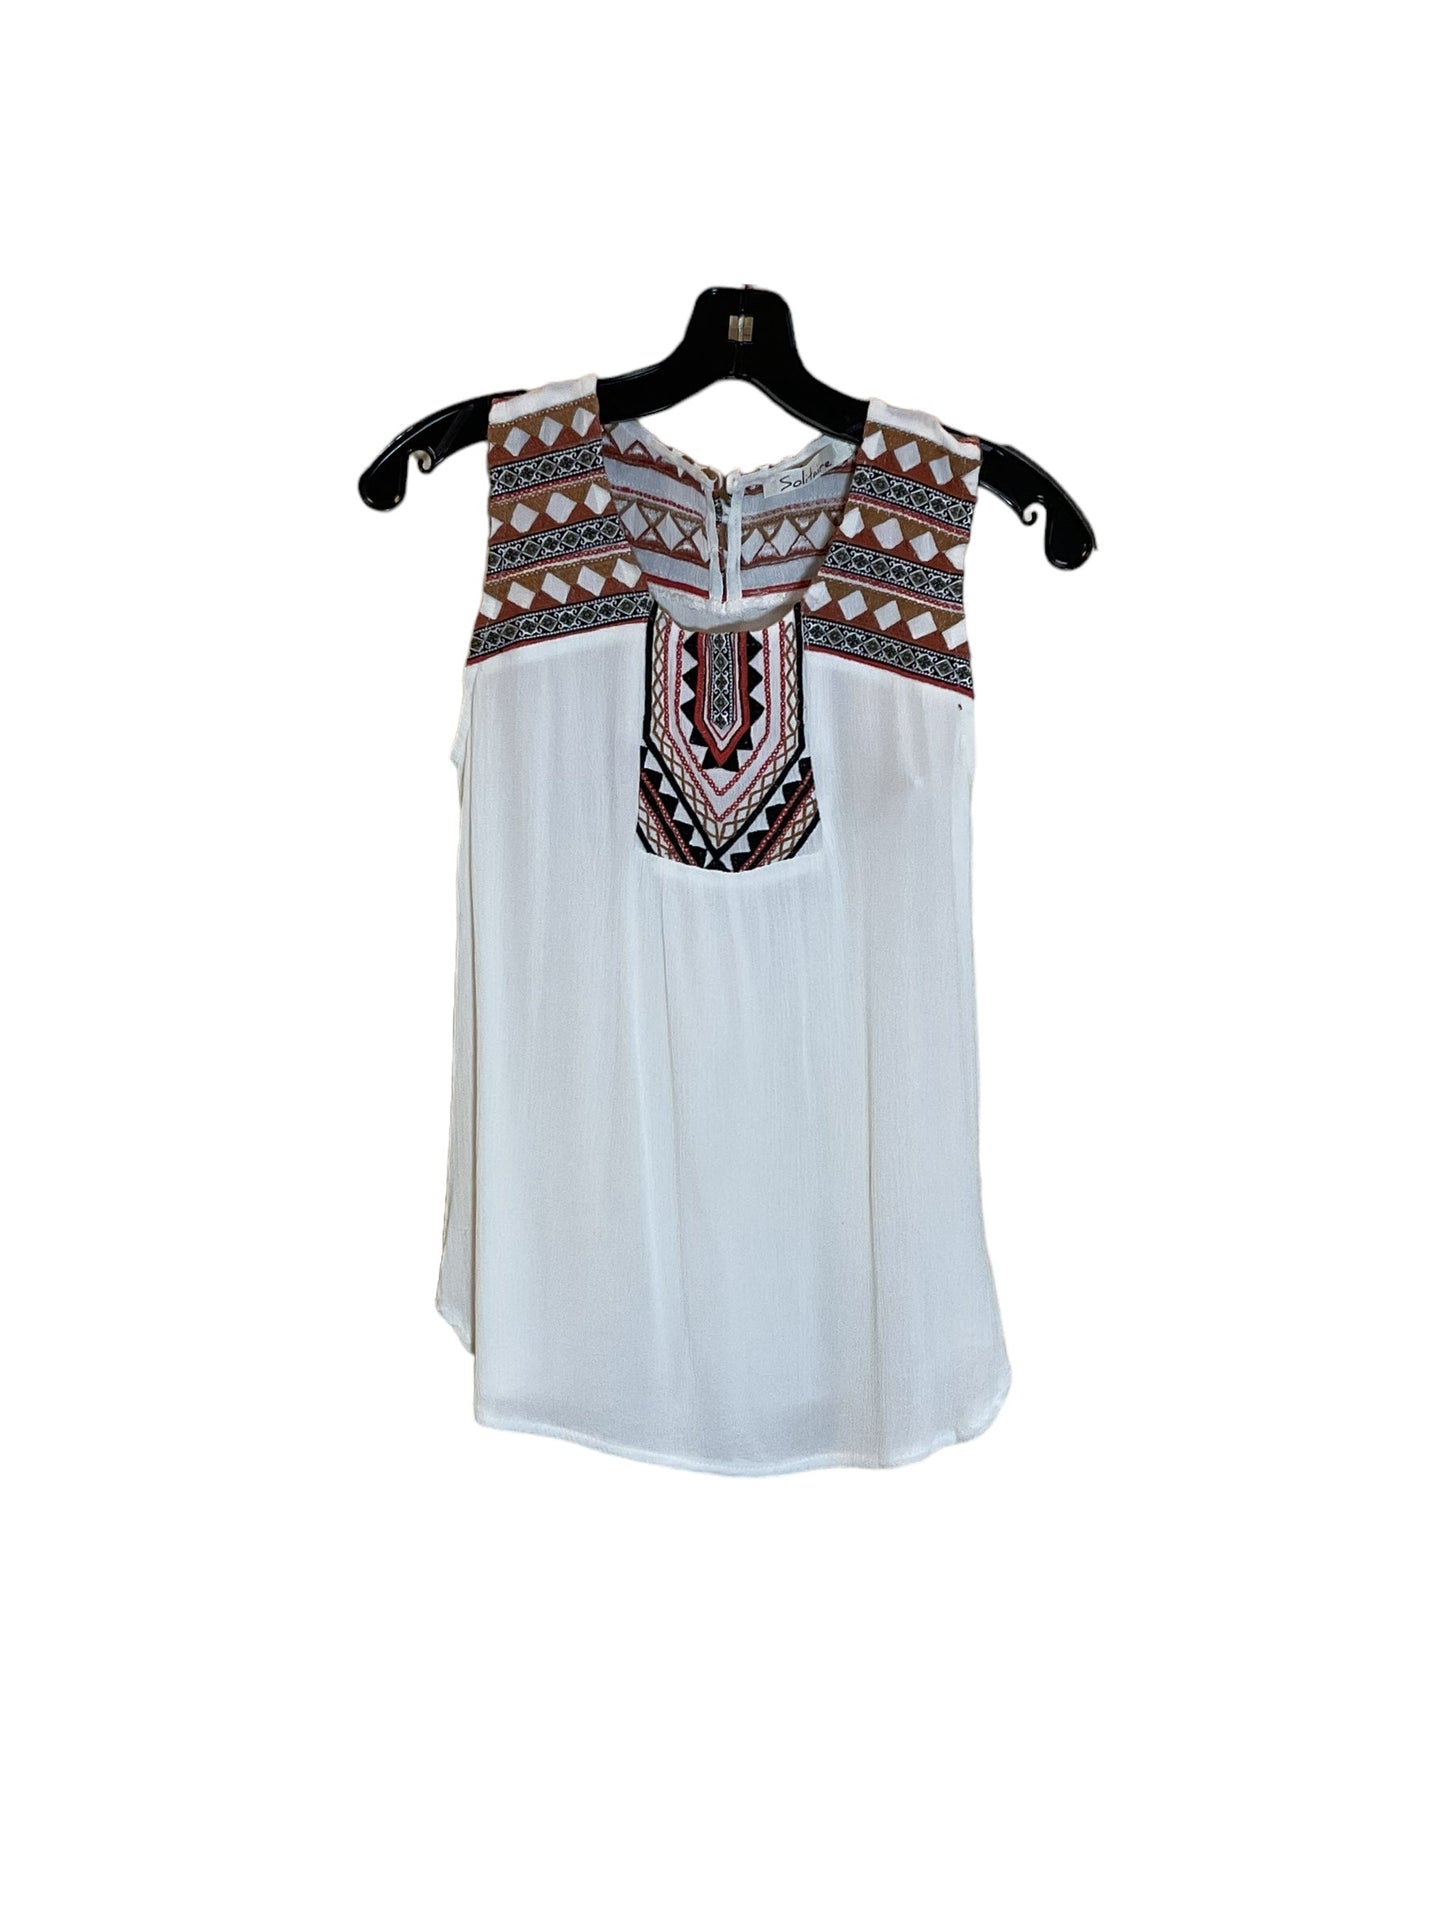 White Top Sleeveless Solitaire, Size S